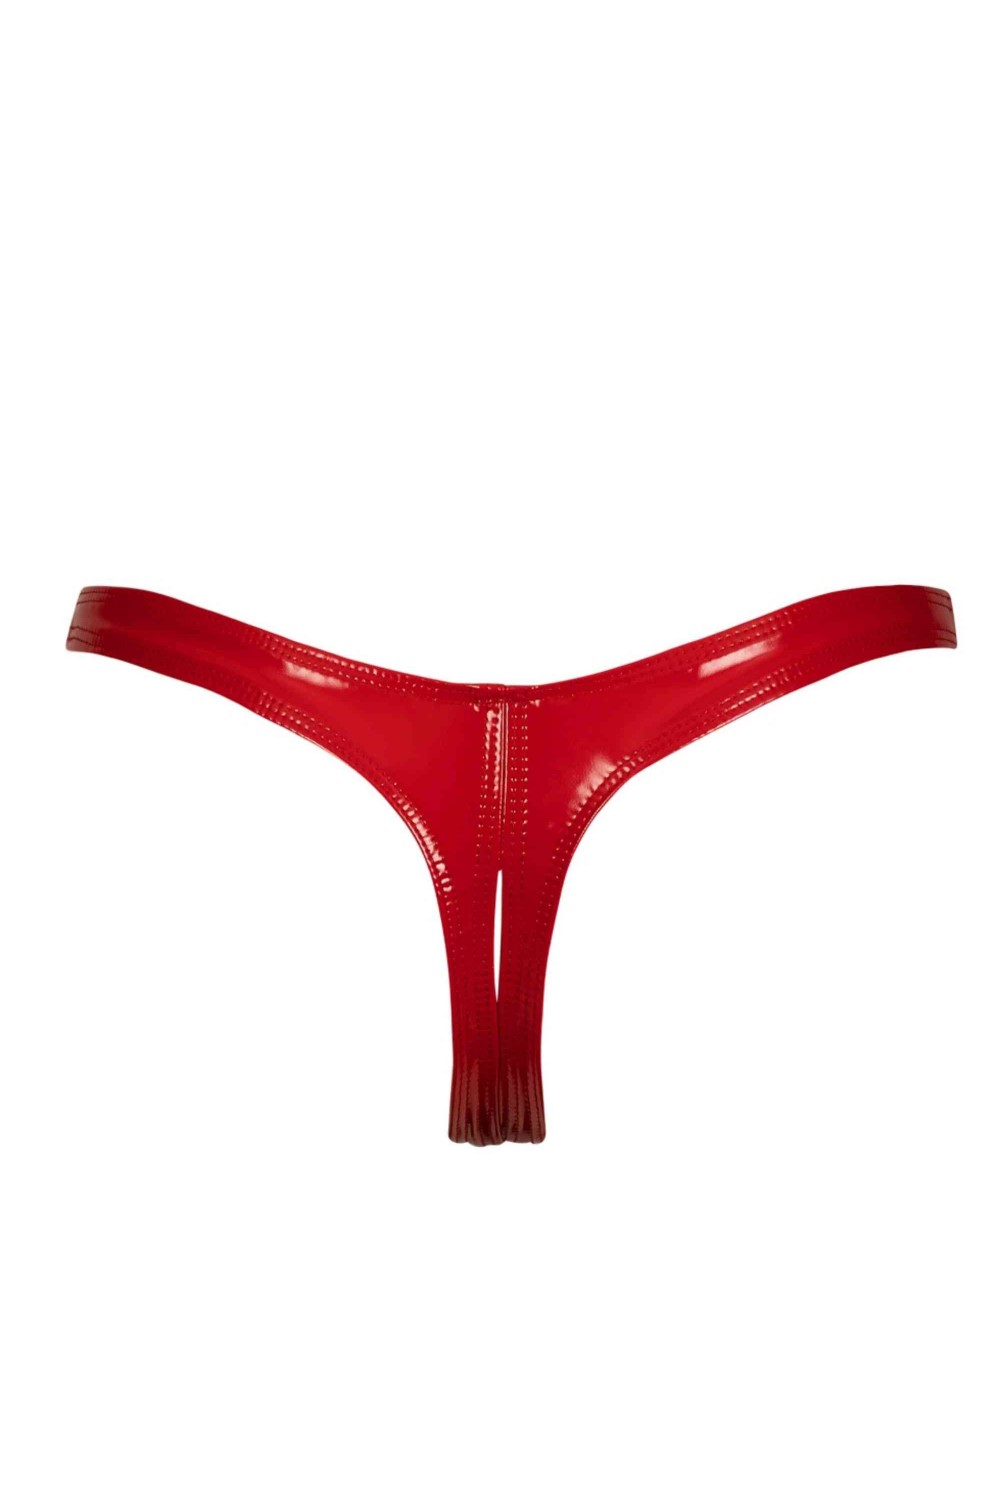 Annabelle Vinyl Crotchless Thong Patrice Catanzaro Official Website 